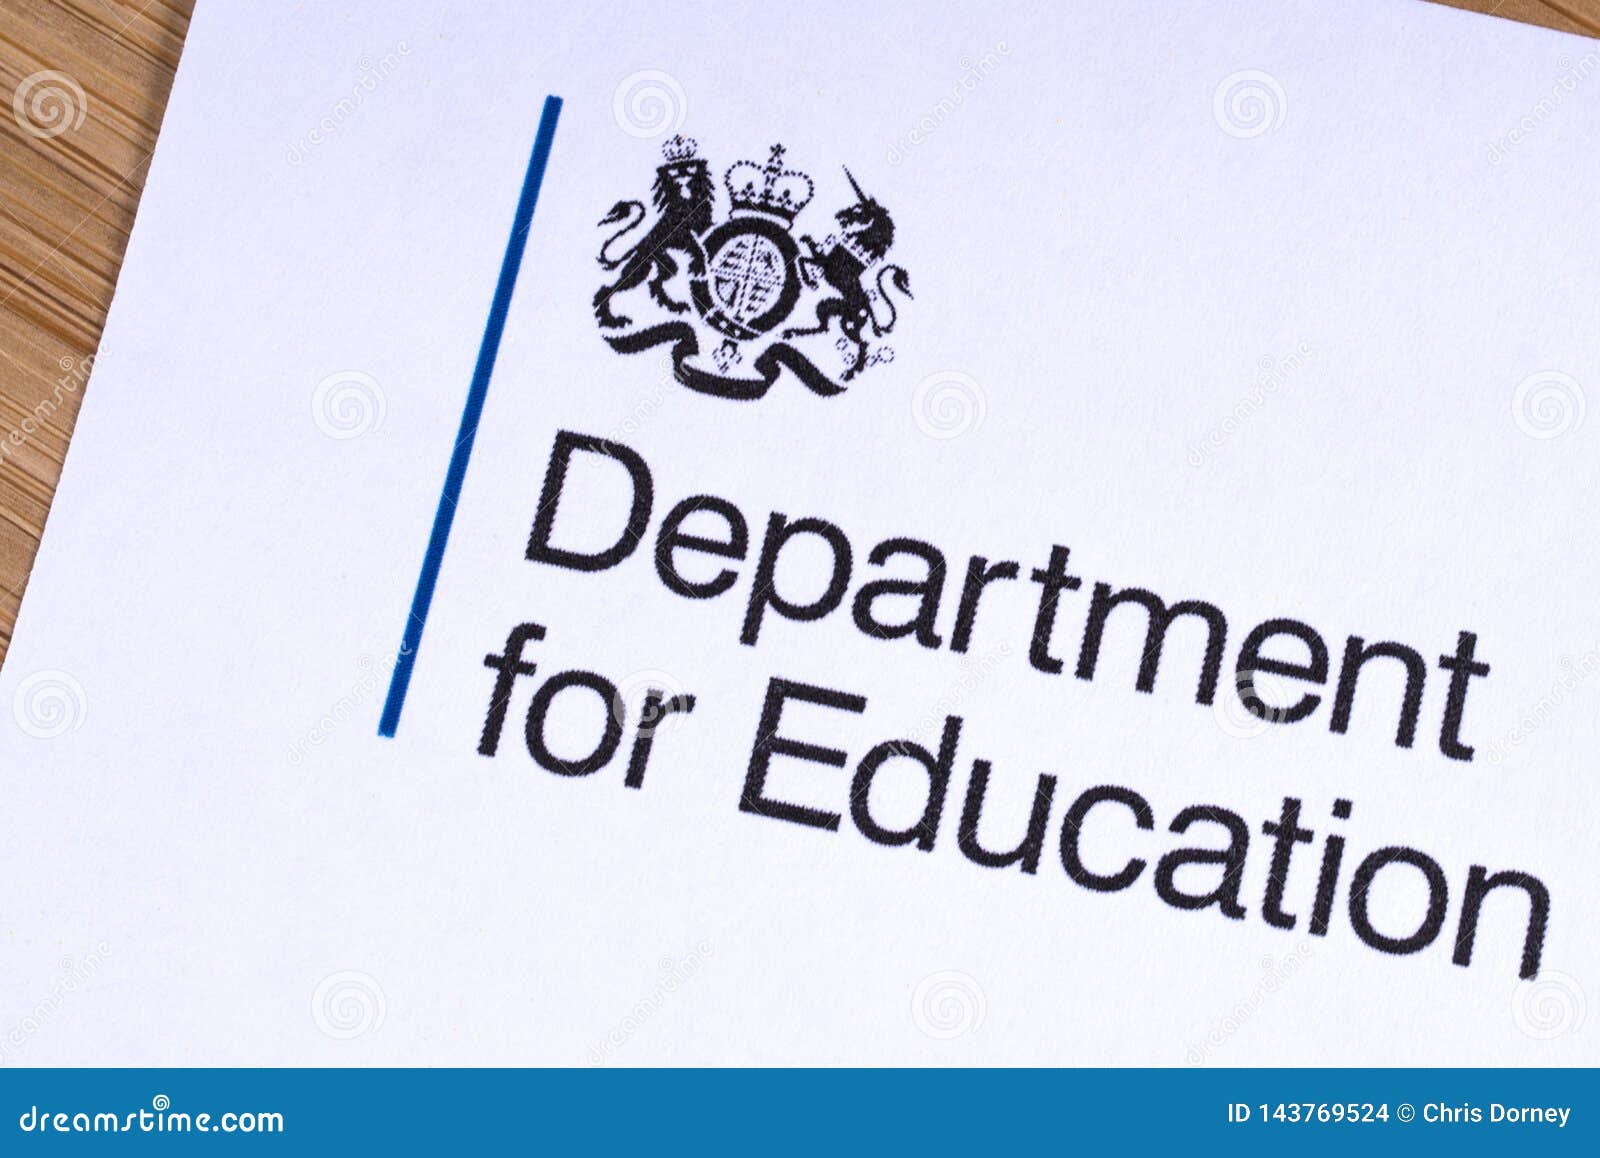 ministry of education uk